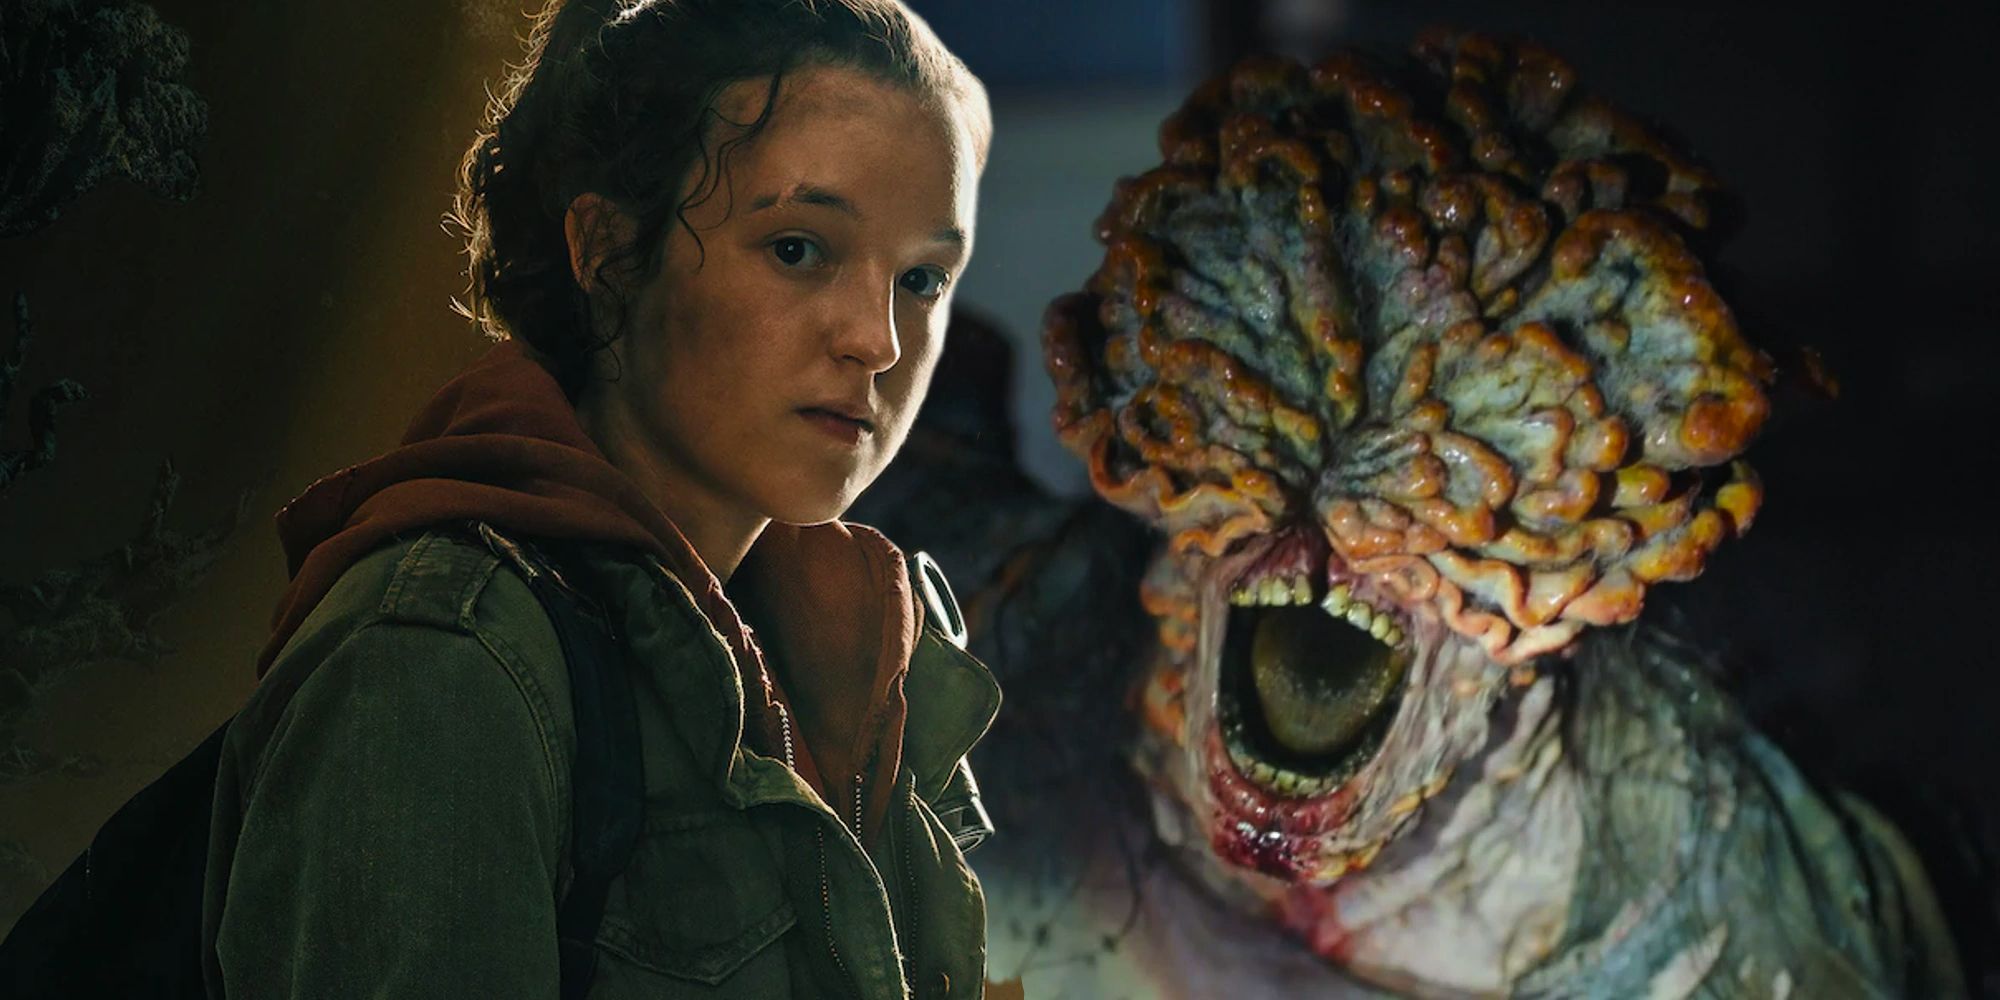 Ellie character poster and Clicker screaming at Ellie, Joel and Tess from HBO's The Last of Us.